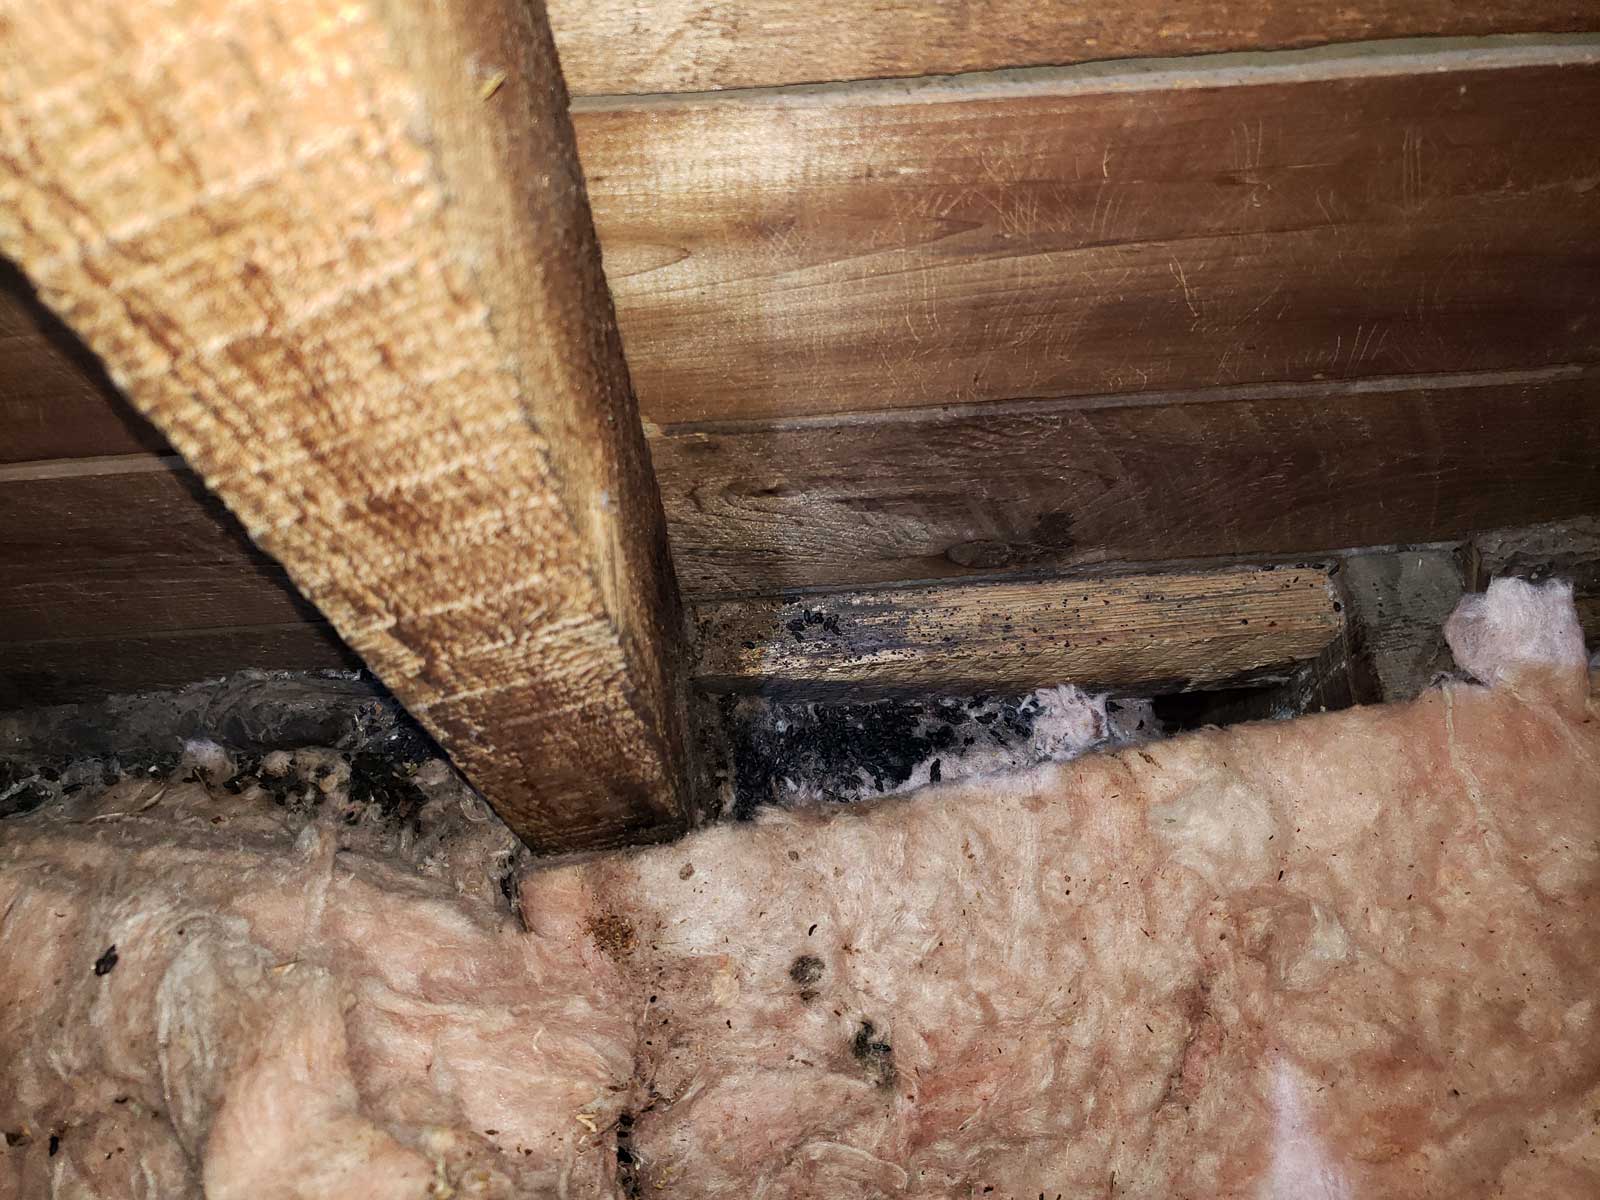 Flying Squirrel in the Attic - Humane Removal of Flying Squirrels